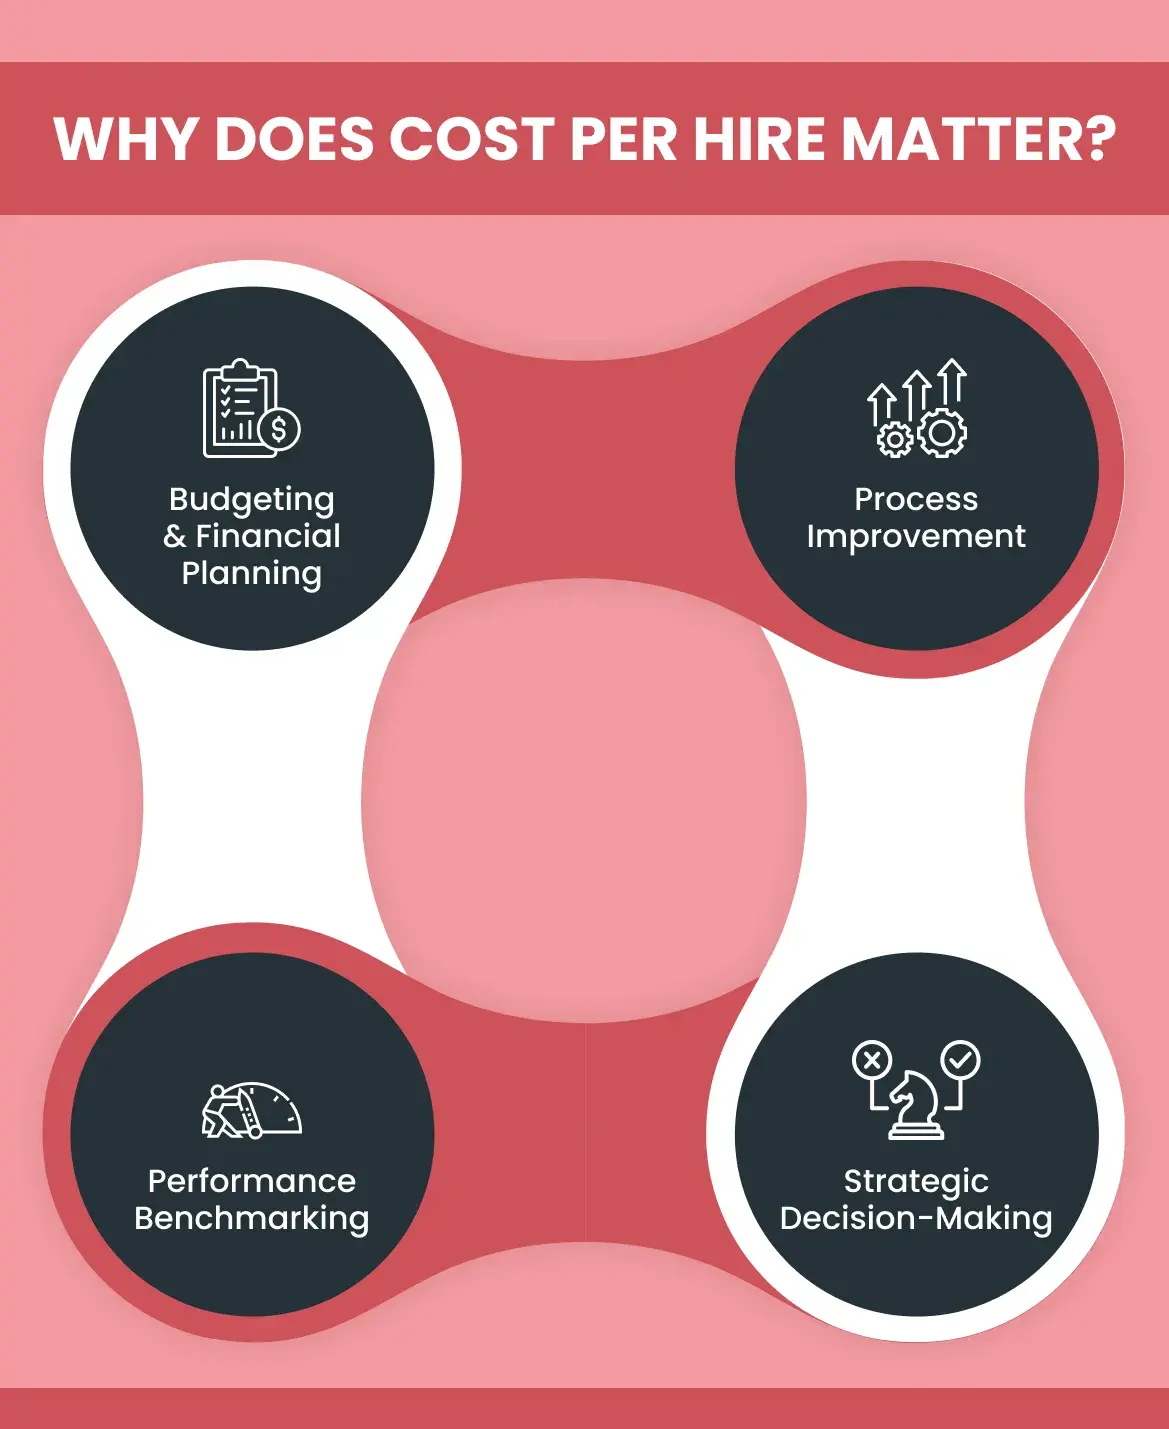 Why Does Cost Per Hire Matter